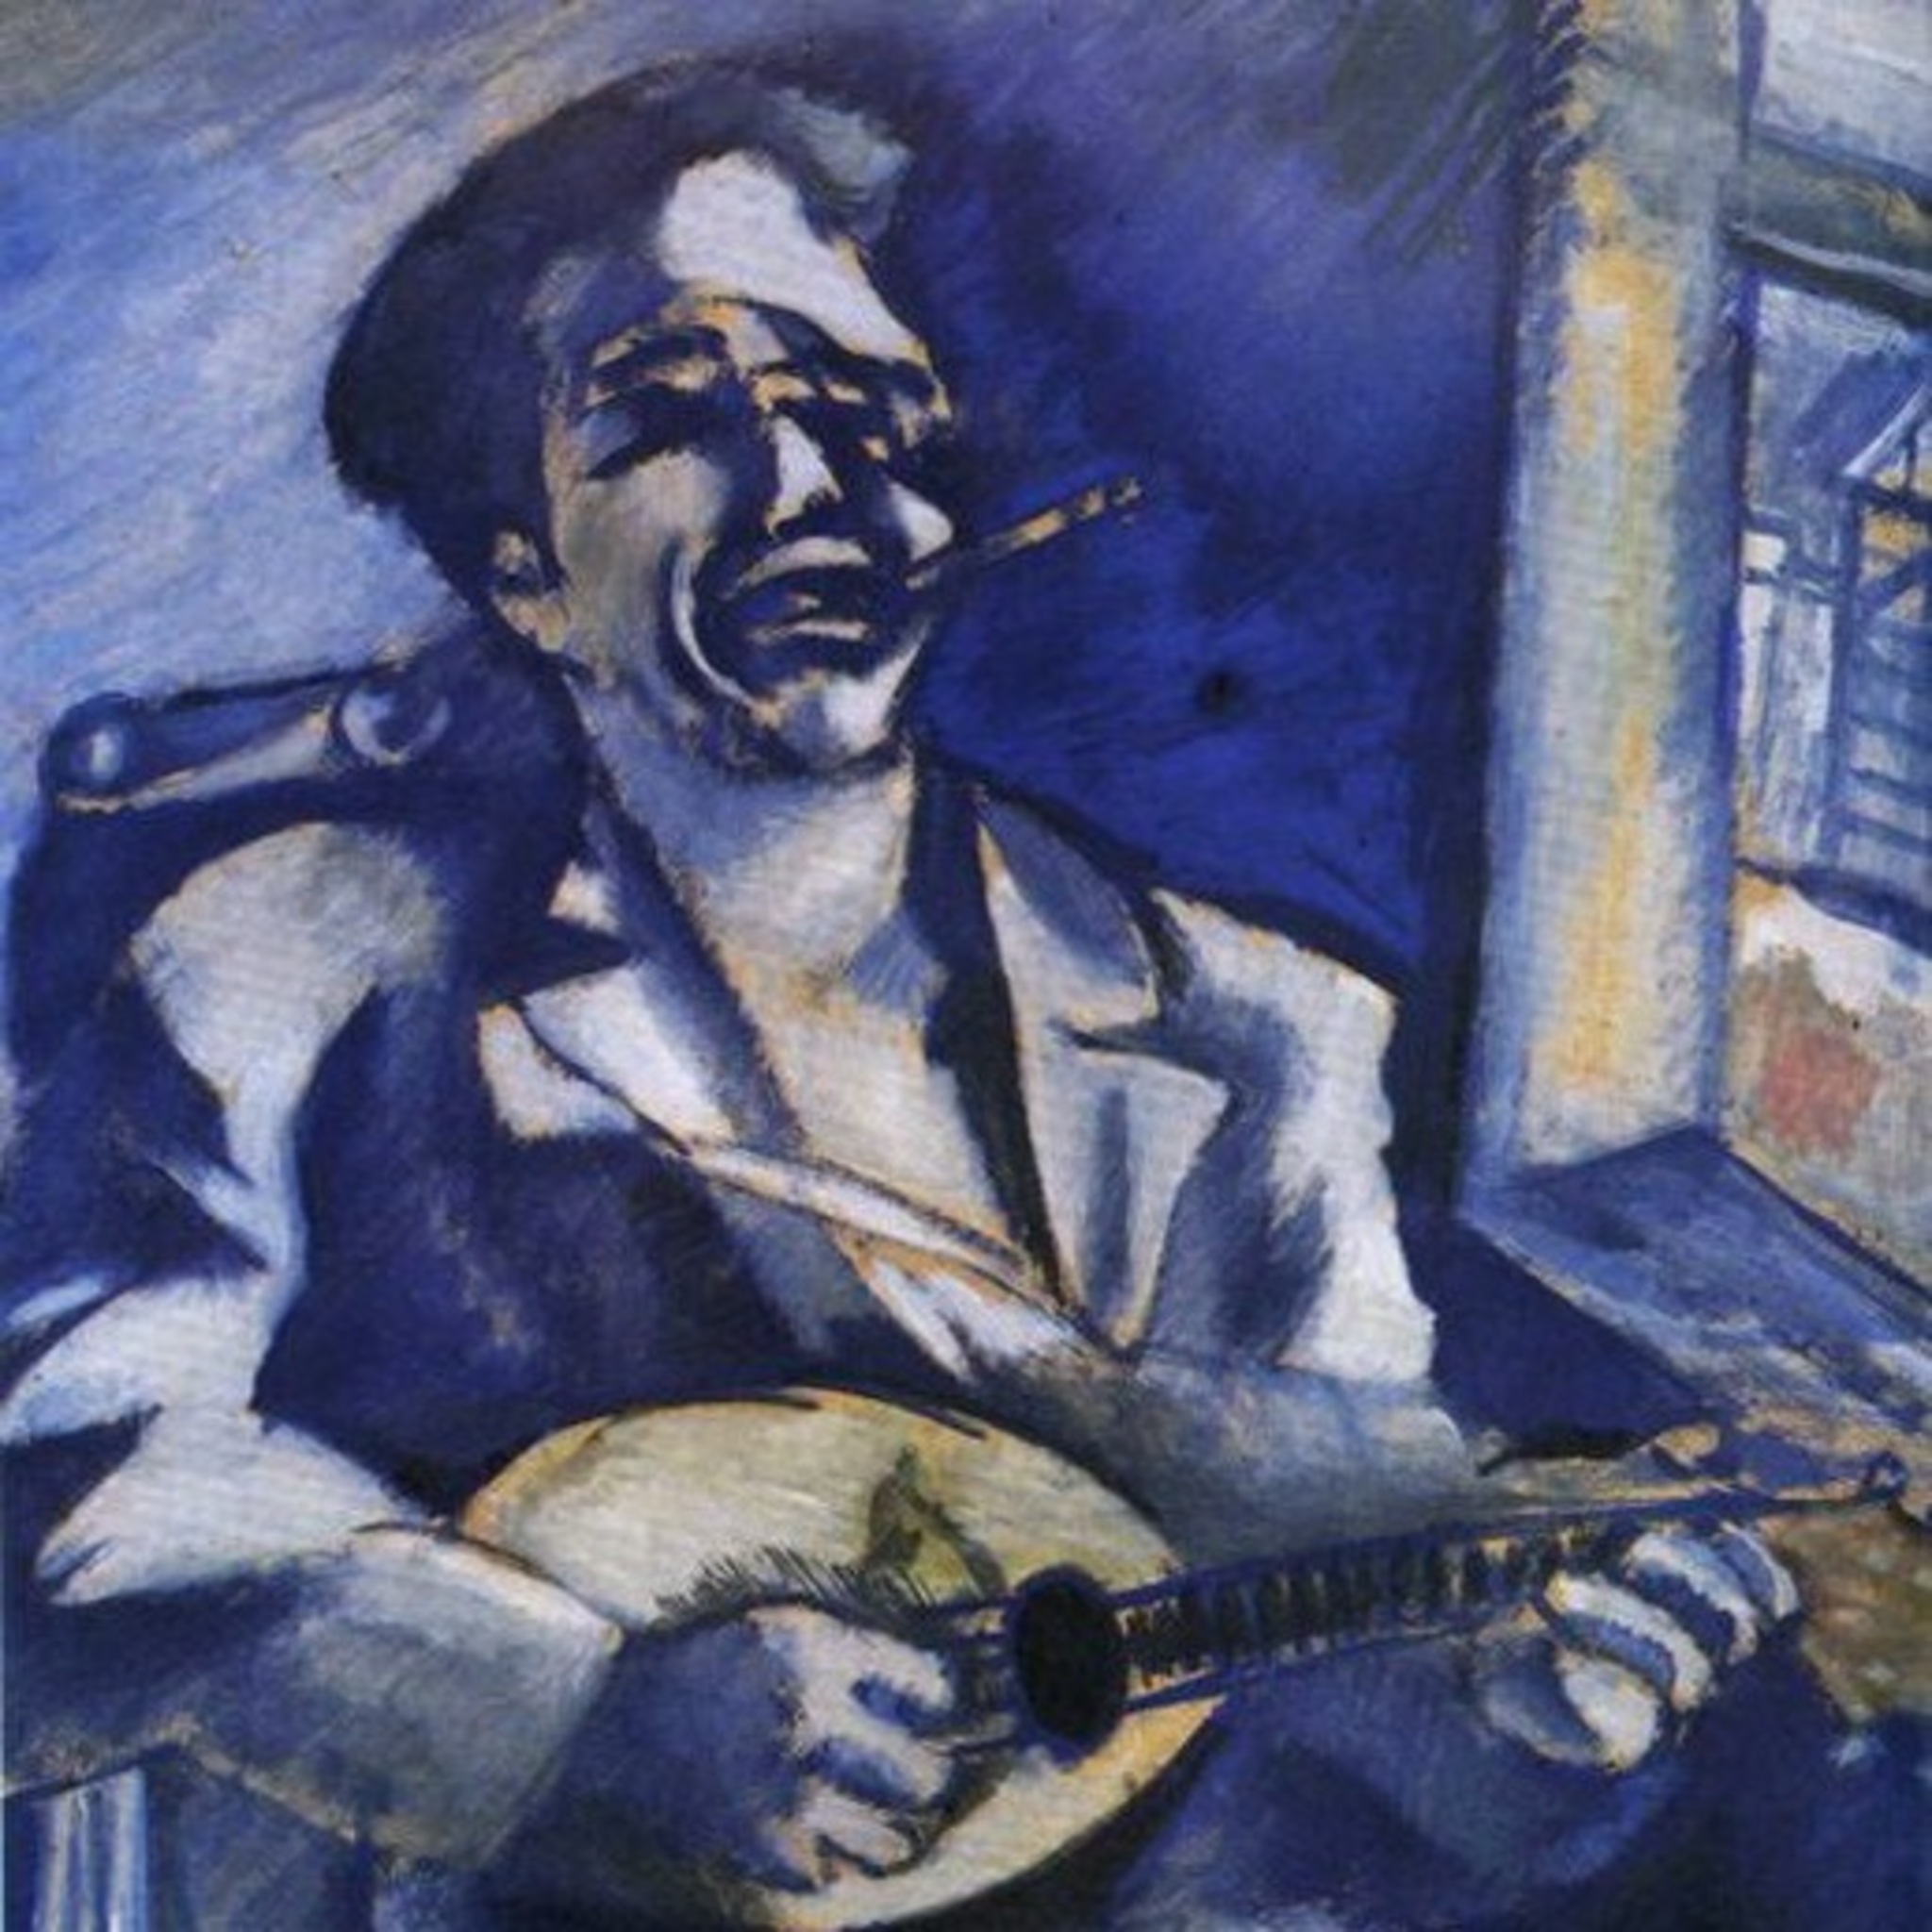 Exhibition of one painting by Marc Chagall, Portrait of a brother David with a Mandolin